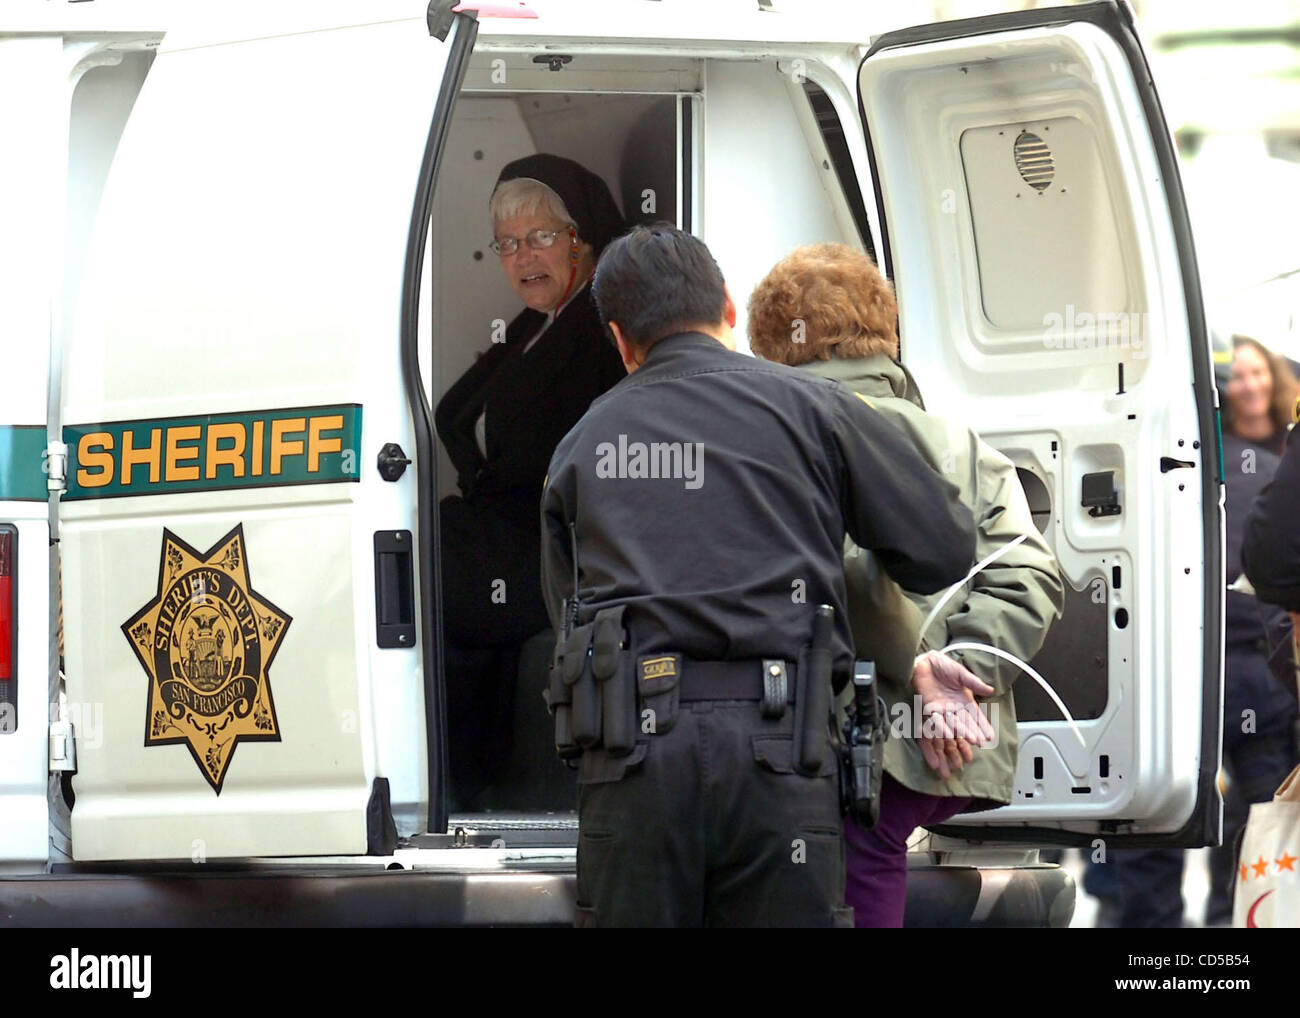 A woman in nun's clothes waits in a paddy wagon after being arrested along with other demonstrators who blocked the intersection of Market and Montgomery Streets in San Francisco's financial district  protesting the fifth anniversary of the Iraq War. More than a hundred arrests were made at the lunc Stock Photo